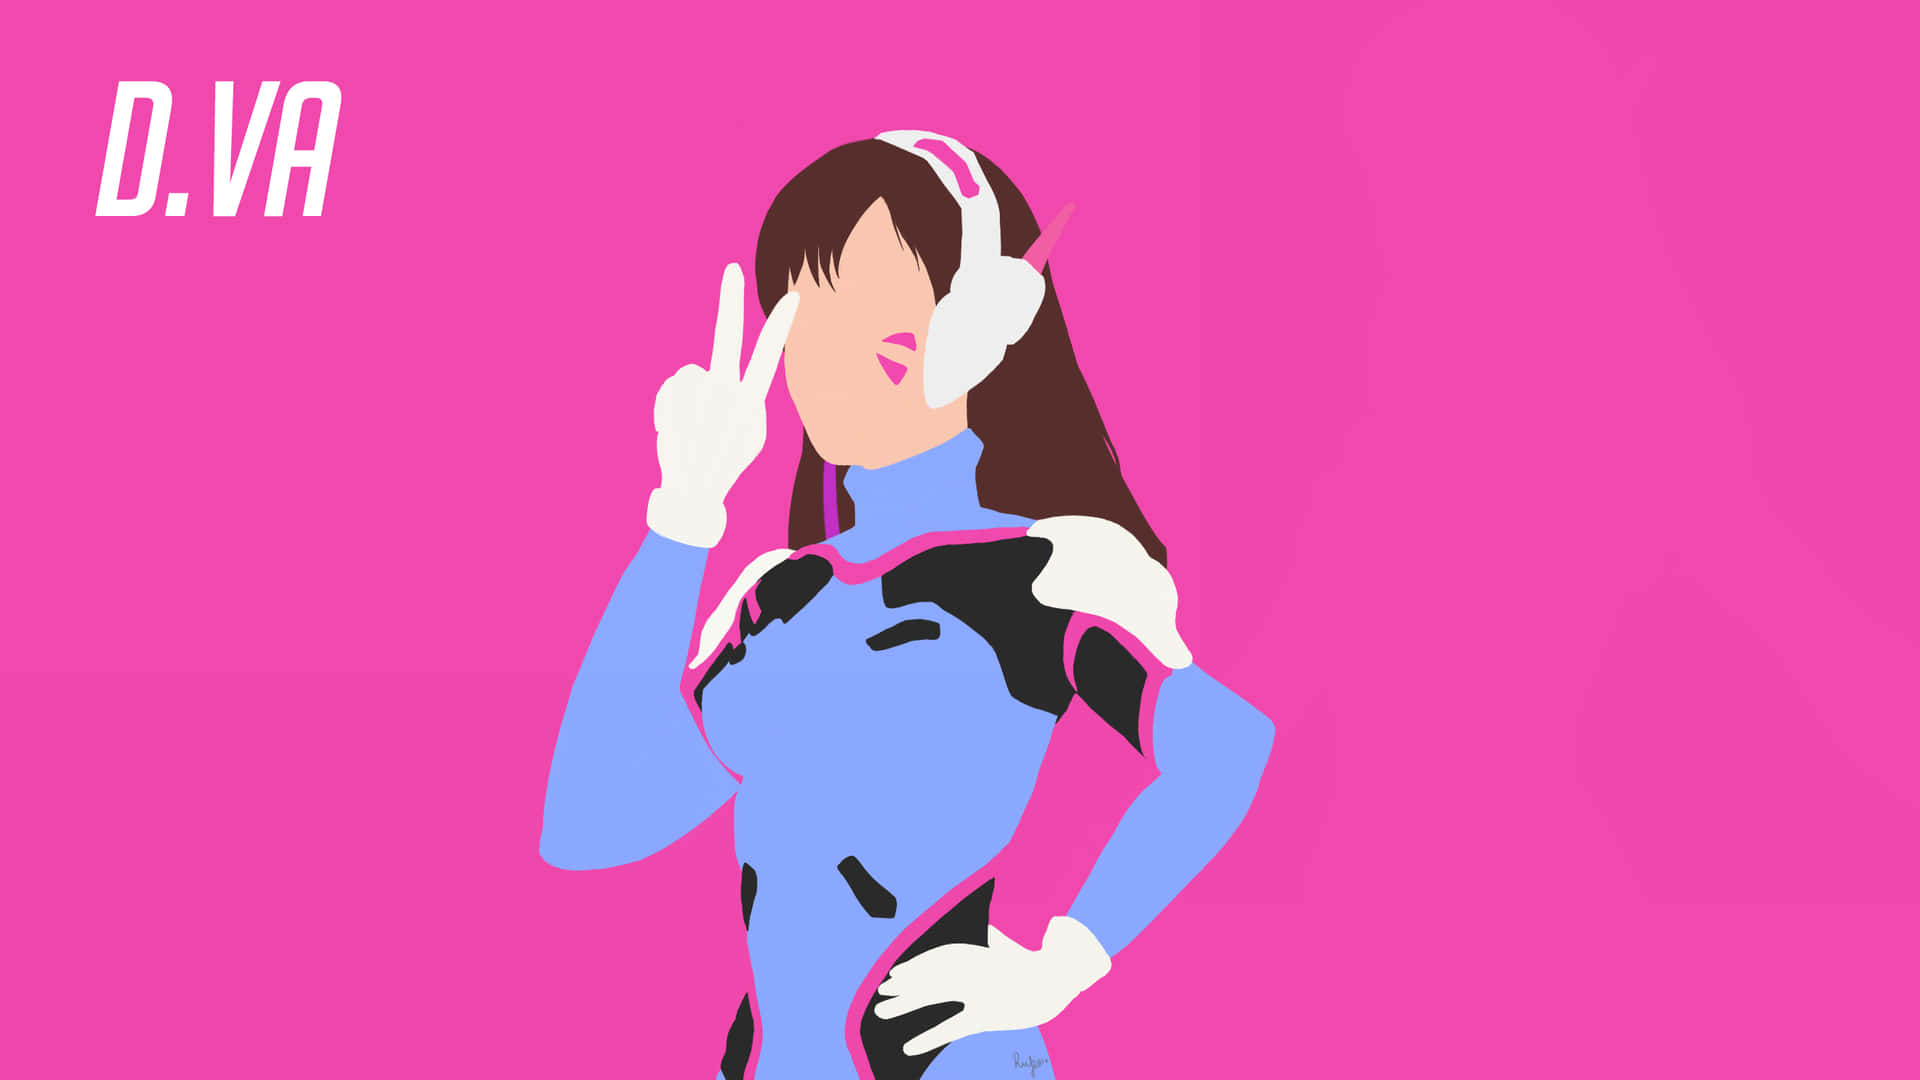 Overwatch Minimalist - A bold illustration of your favorite Overwatch heroes. Wallpaper